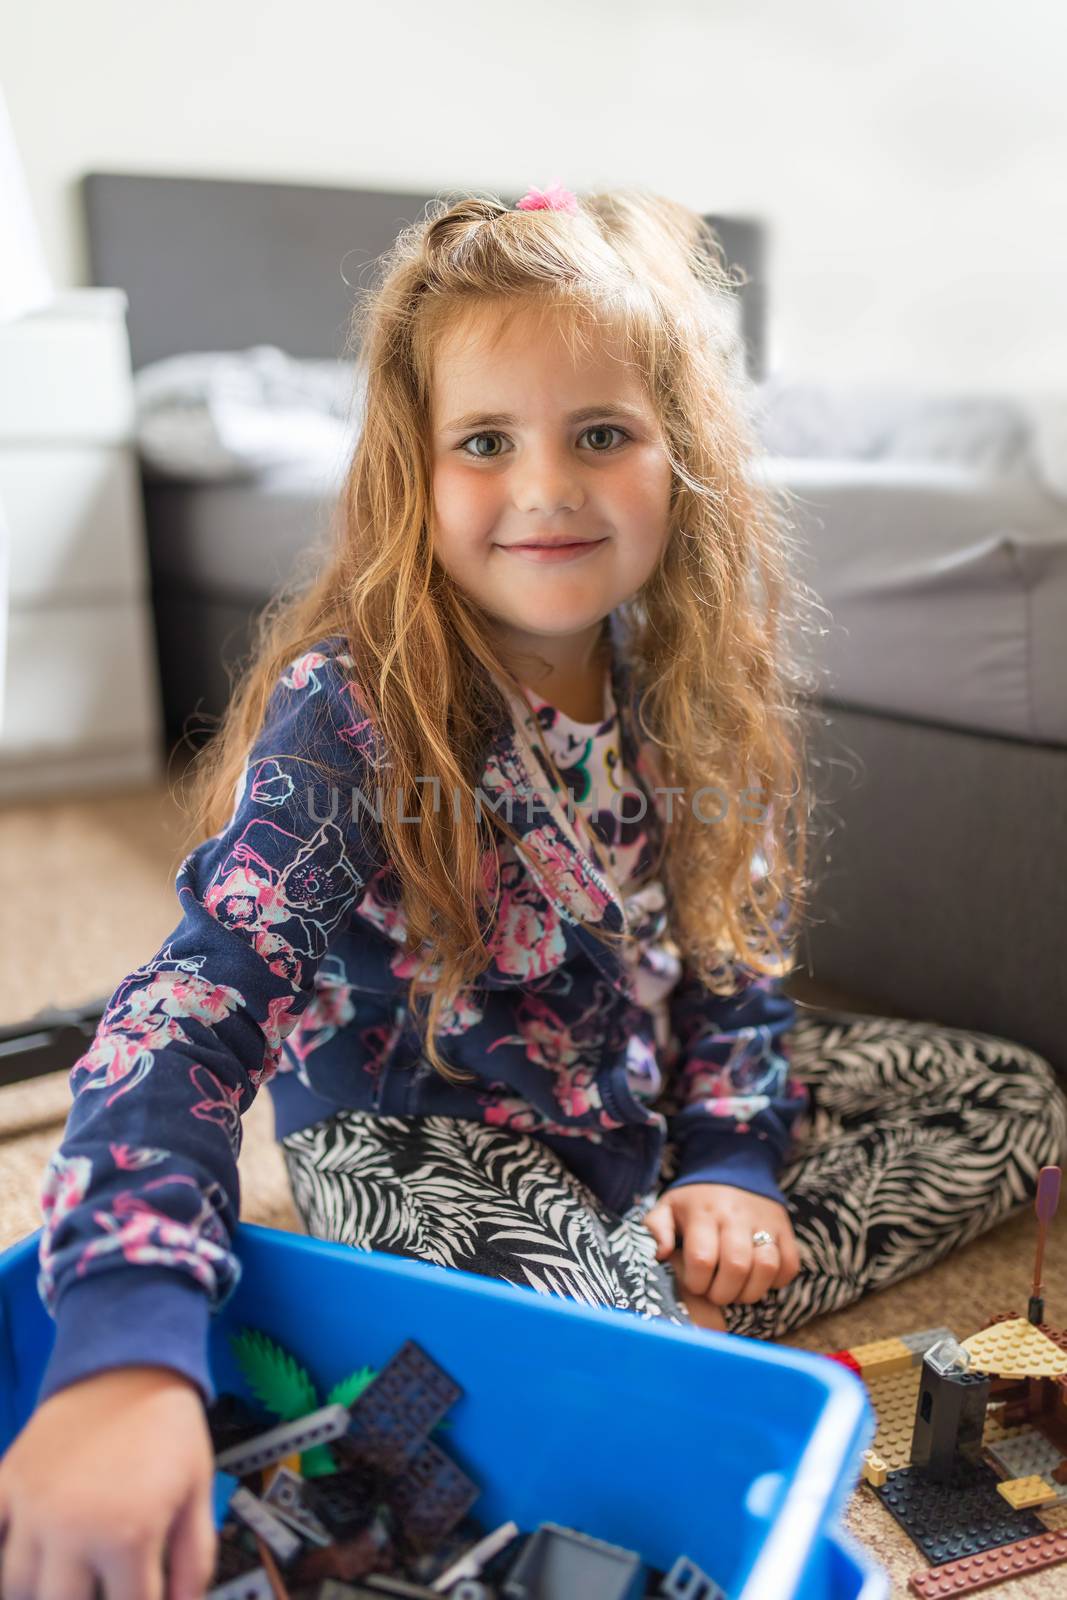 Smiling cute girl with long curly golden hair, charming preschooler cute child plays with child's building kit.